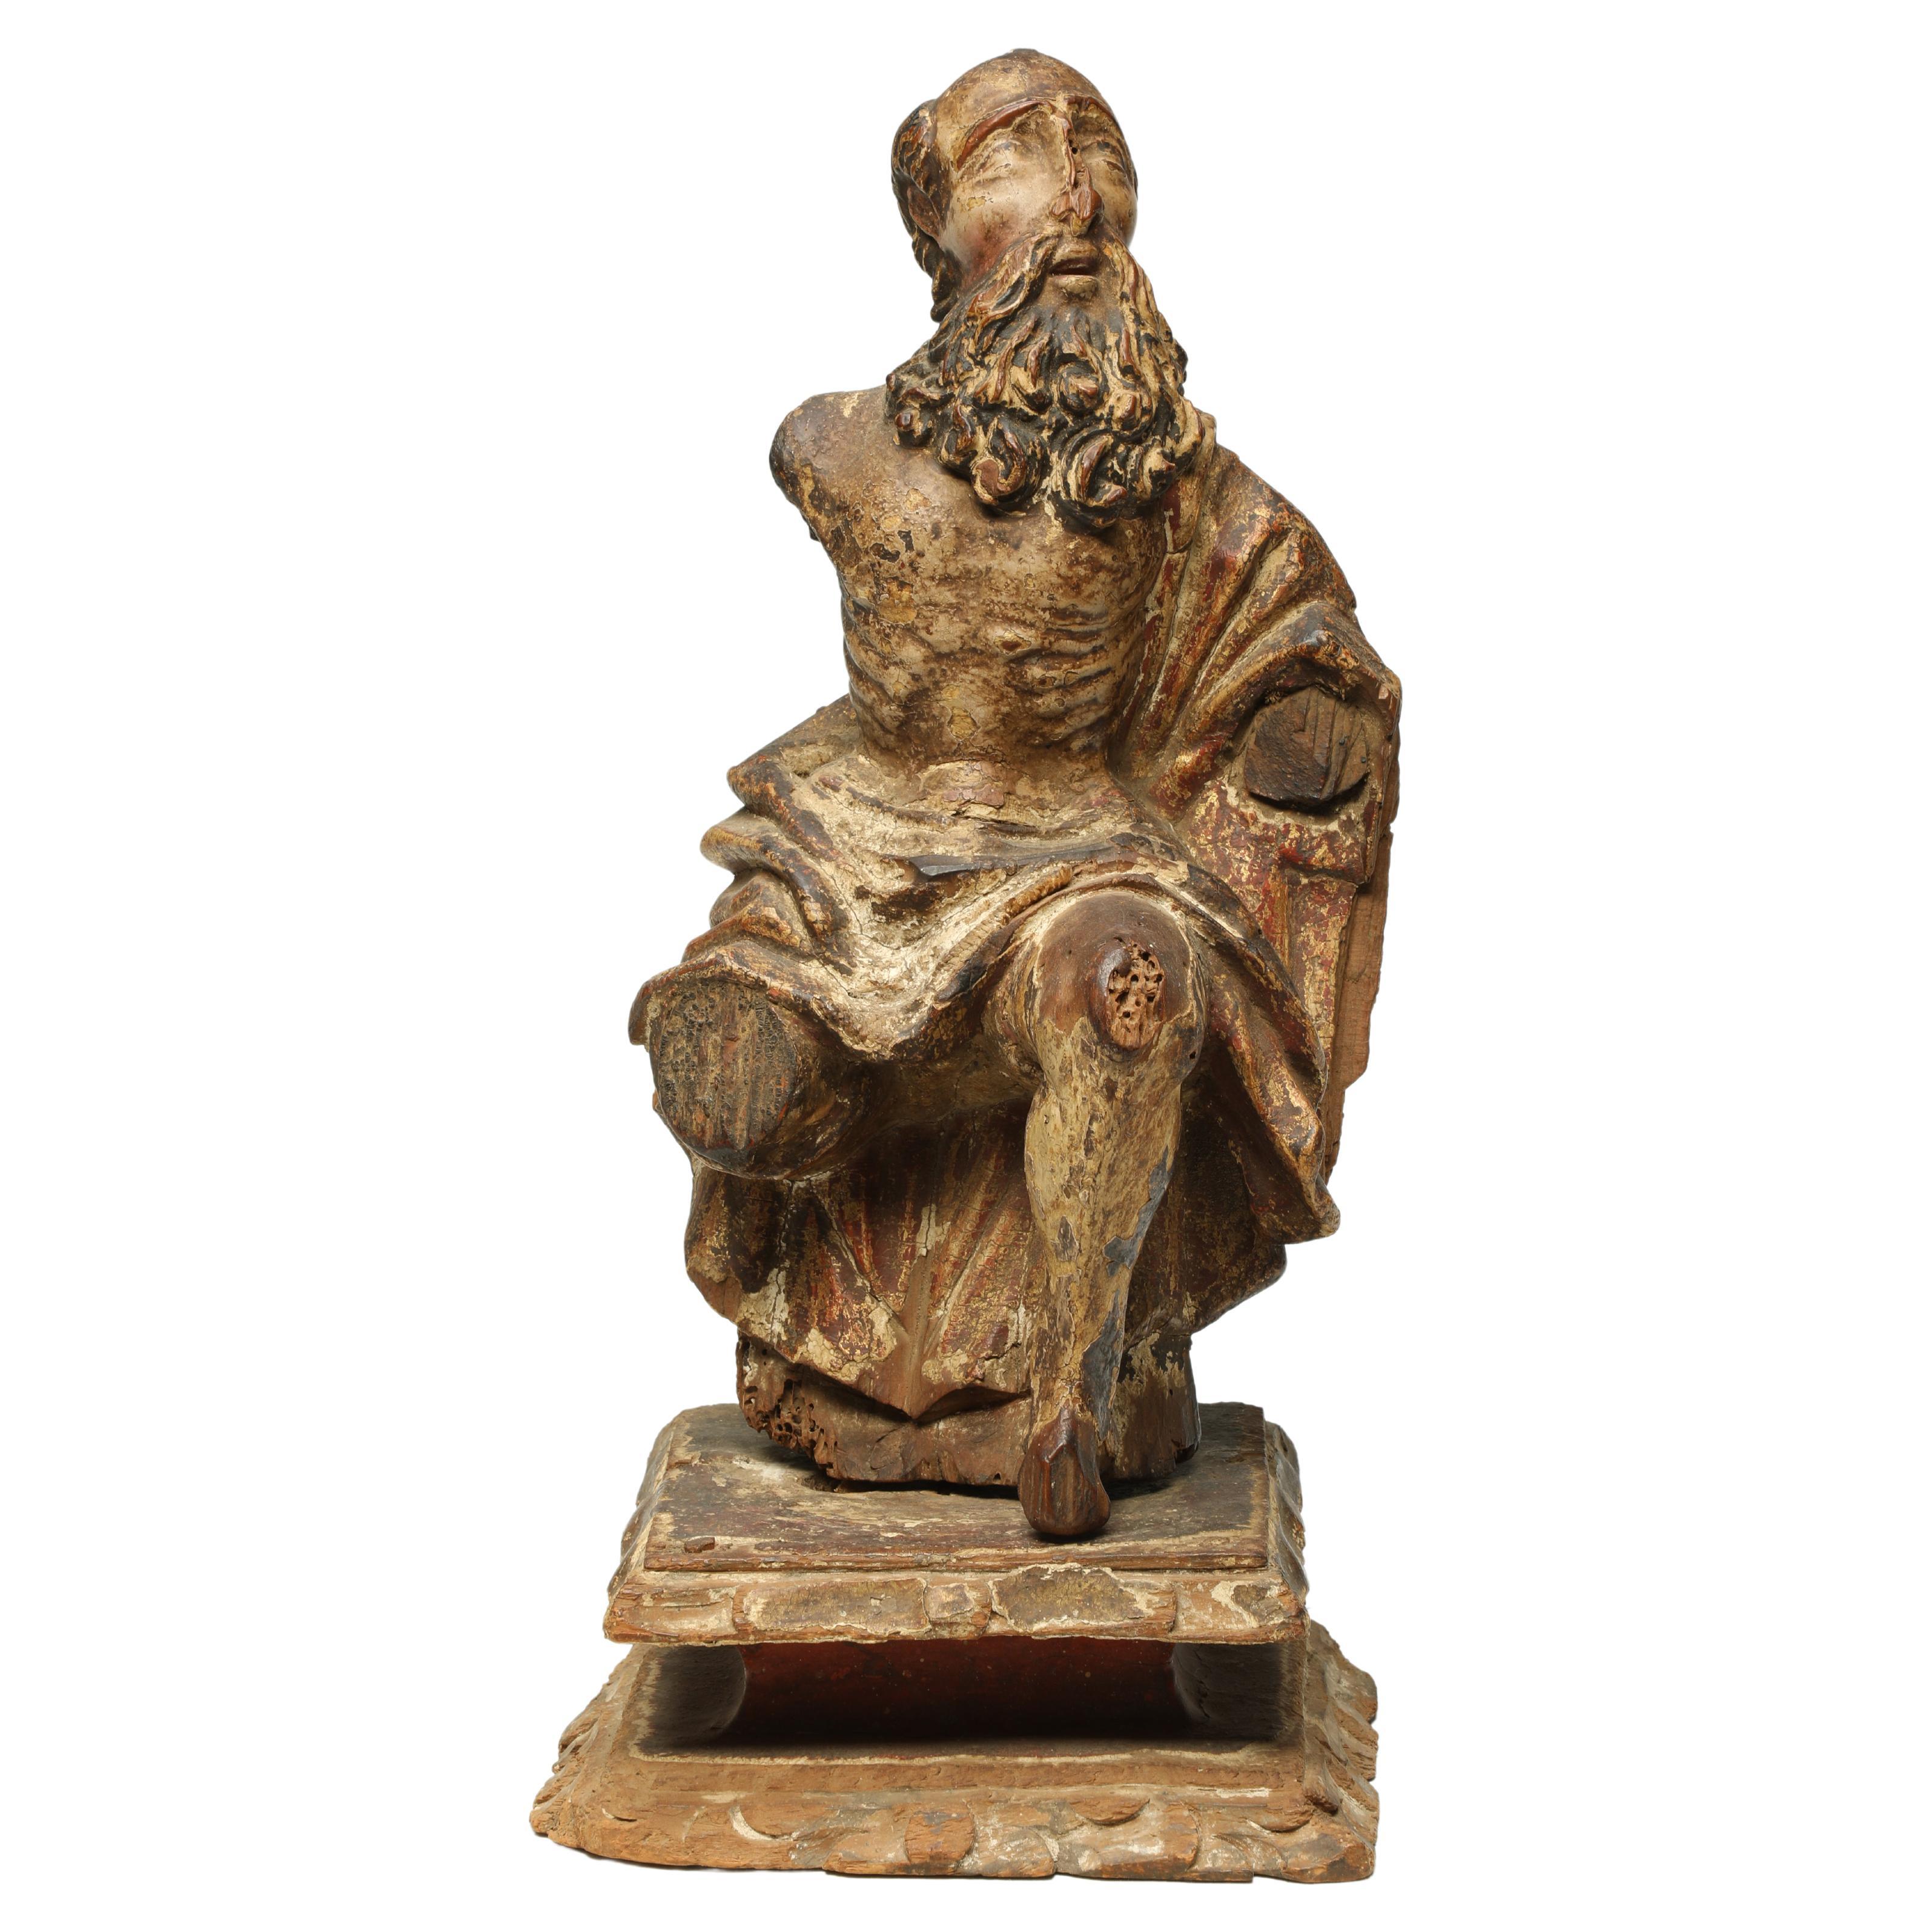 Antique 17th-18th Century Wood Italian Seated Saint Figure Fragment with Beard For Sale